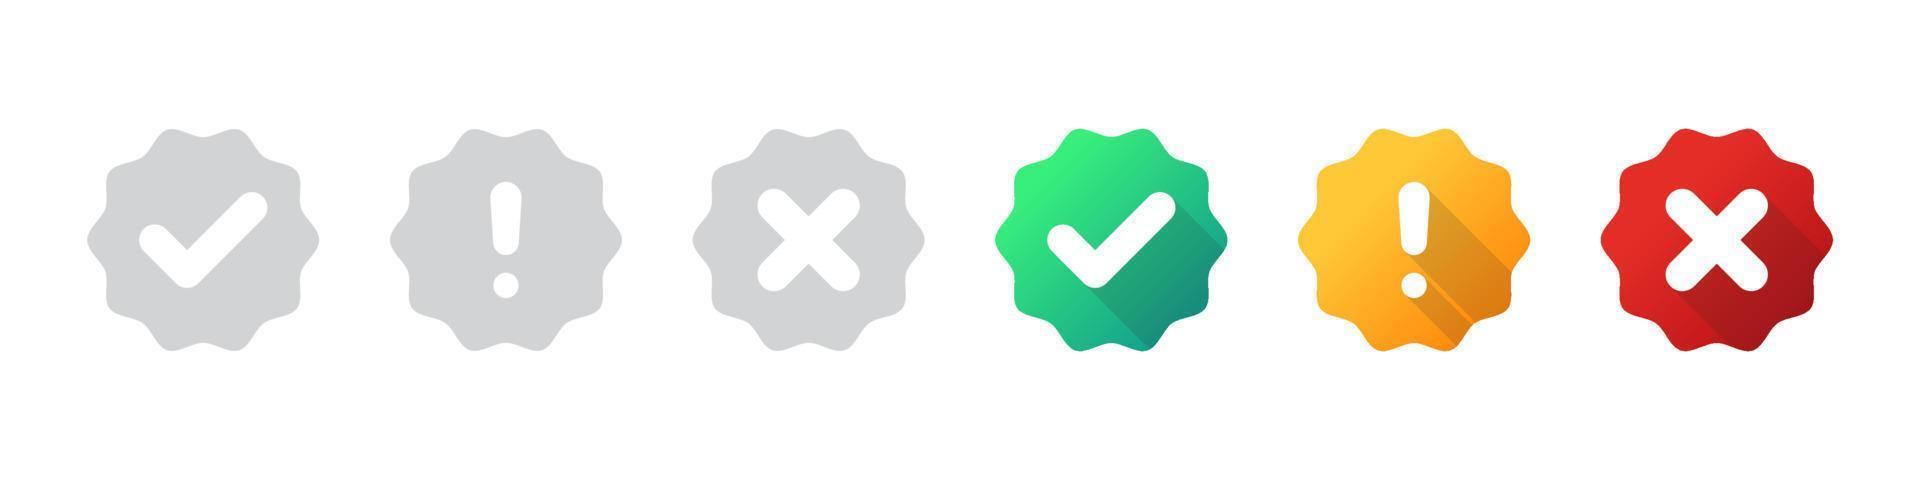 Check mark icons. Correct vote choice. Approval or confirmation icons. Vector images